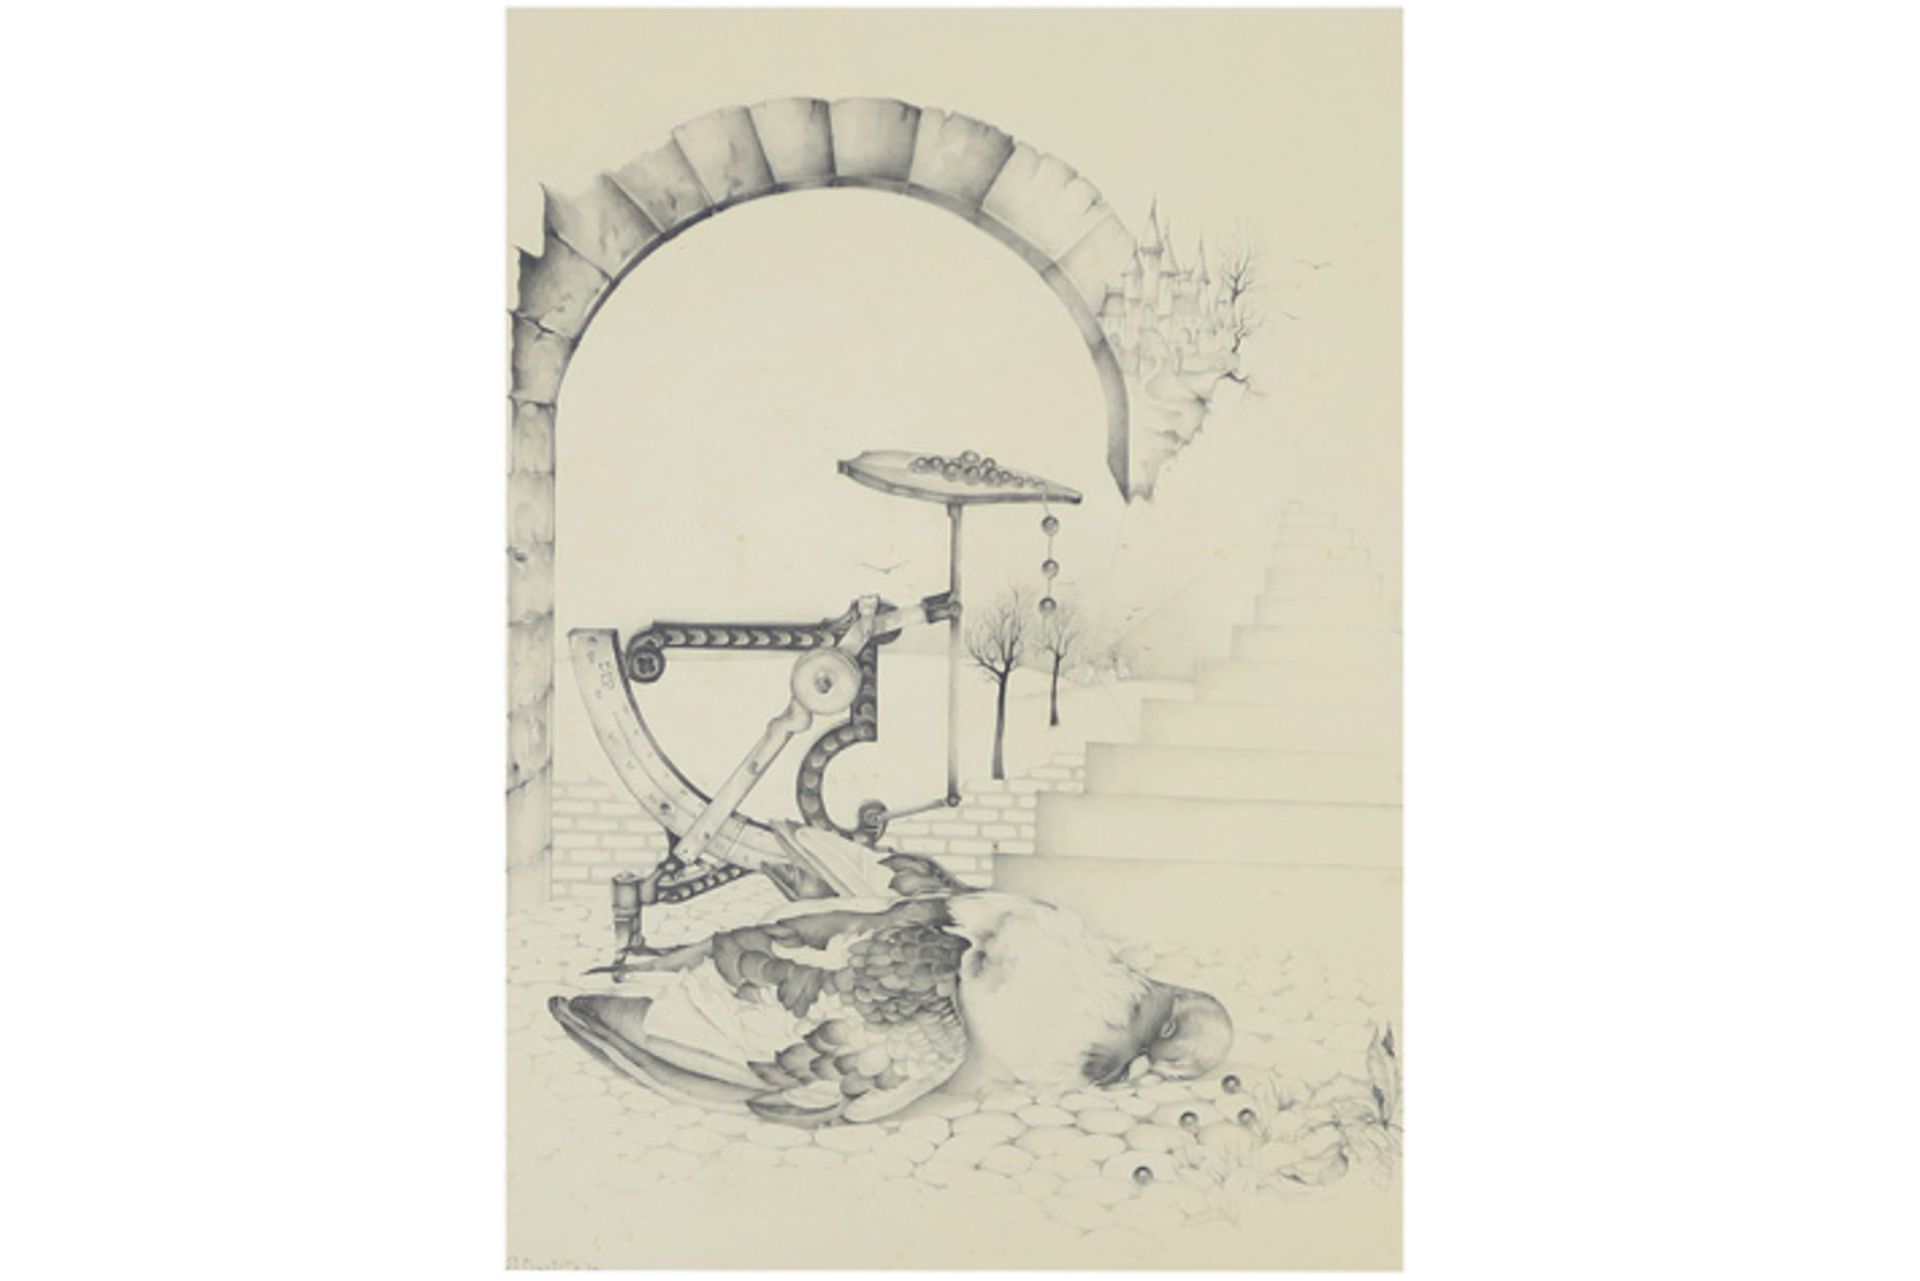 20th Cent. drawing with a surreal theme - signed G. Donatella||DONATELLA G. (20° - 21° EEUW) (